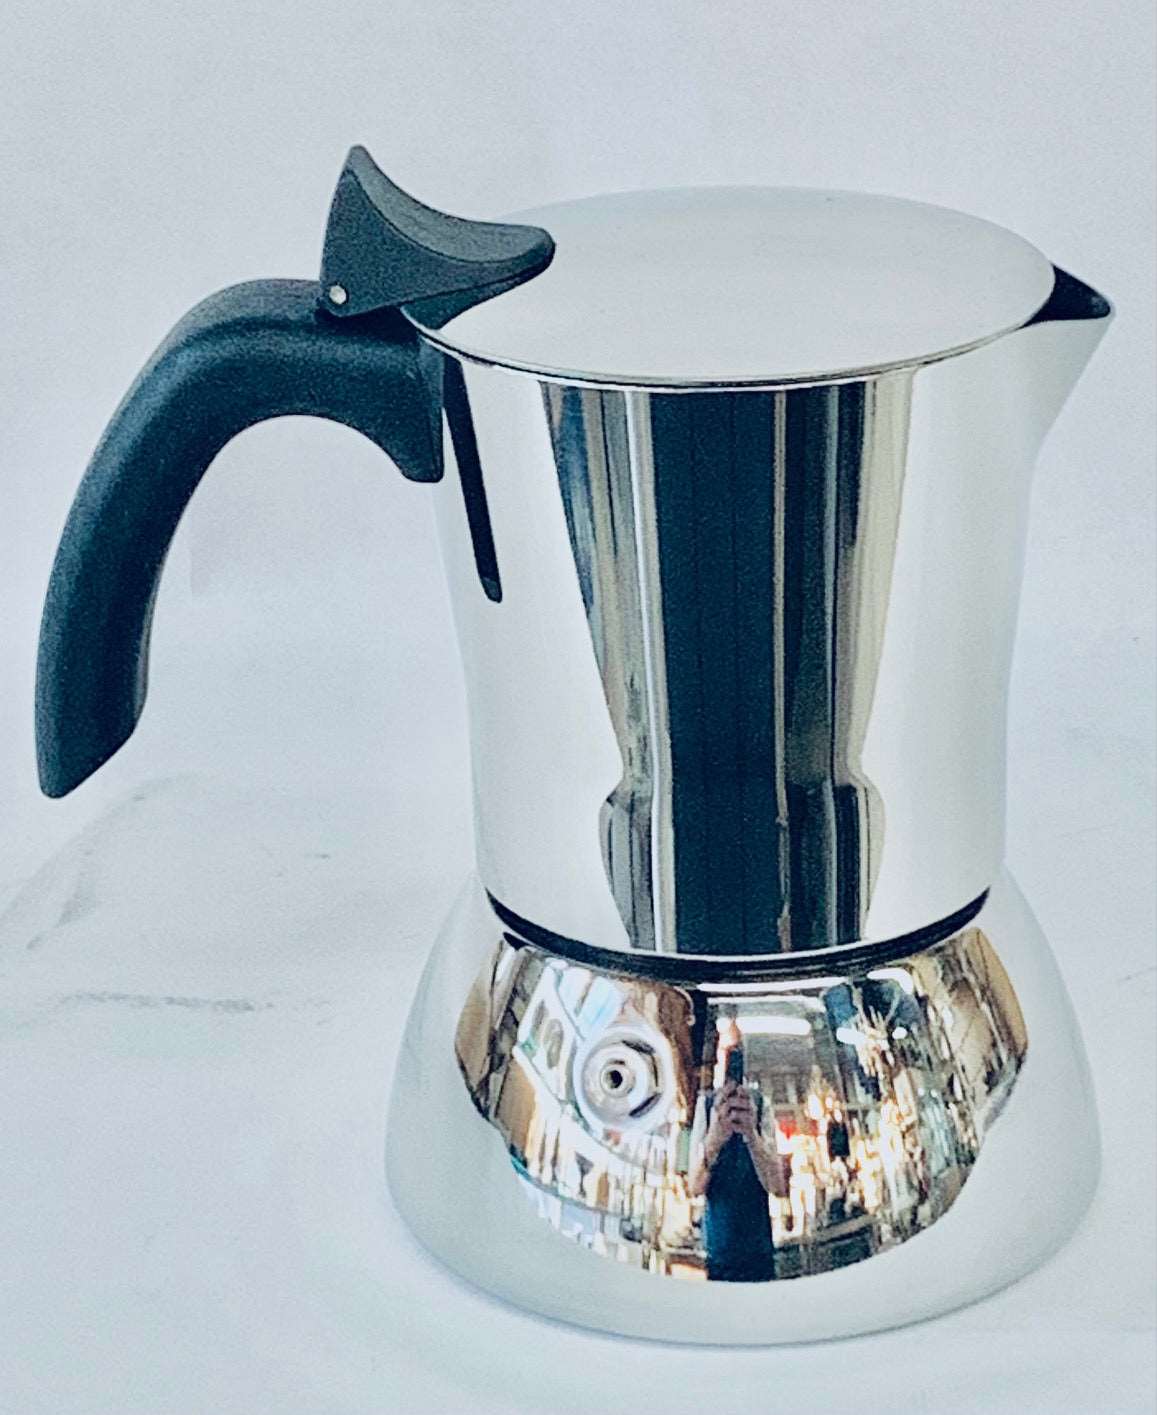 Espresso Maker 3 cups Vitantonio Allegra collection 18/10 Stainless Steel, Made in Italy - Royal Gift